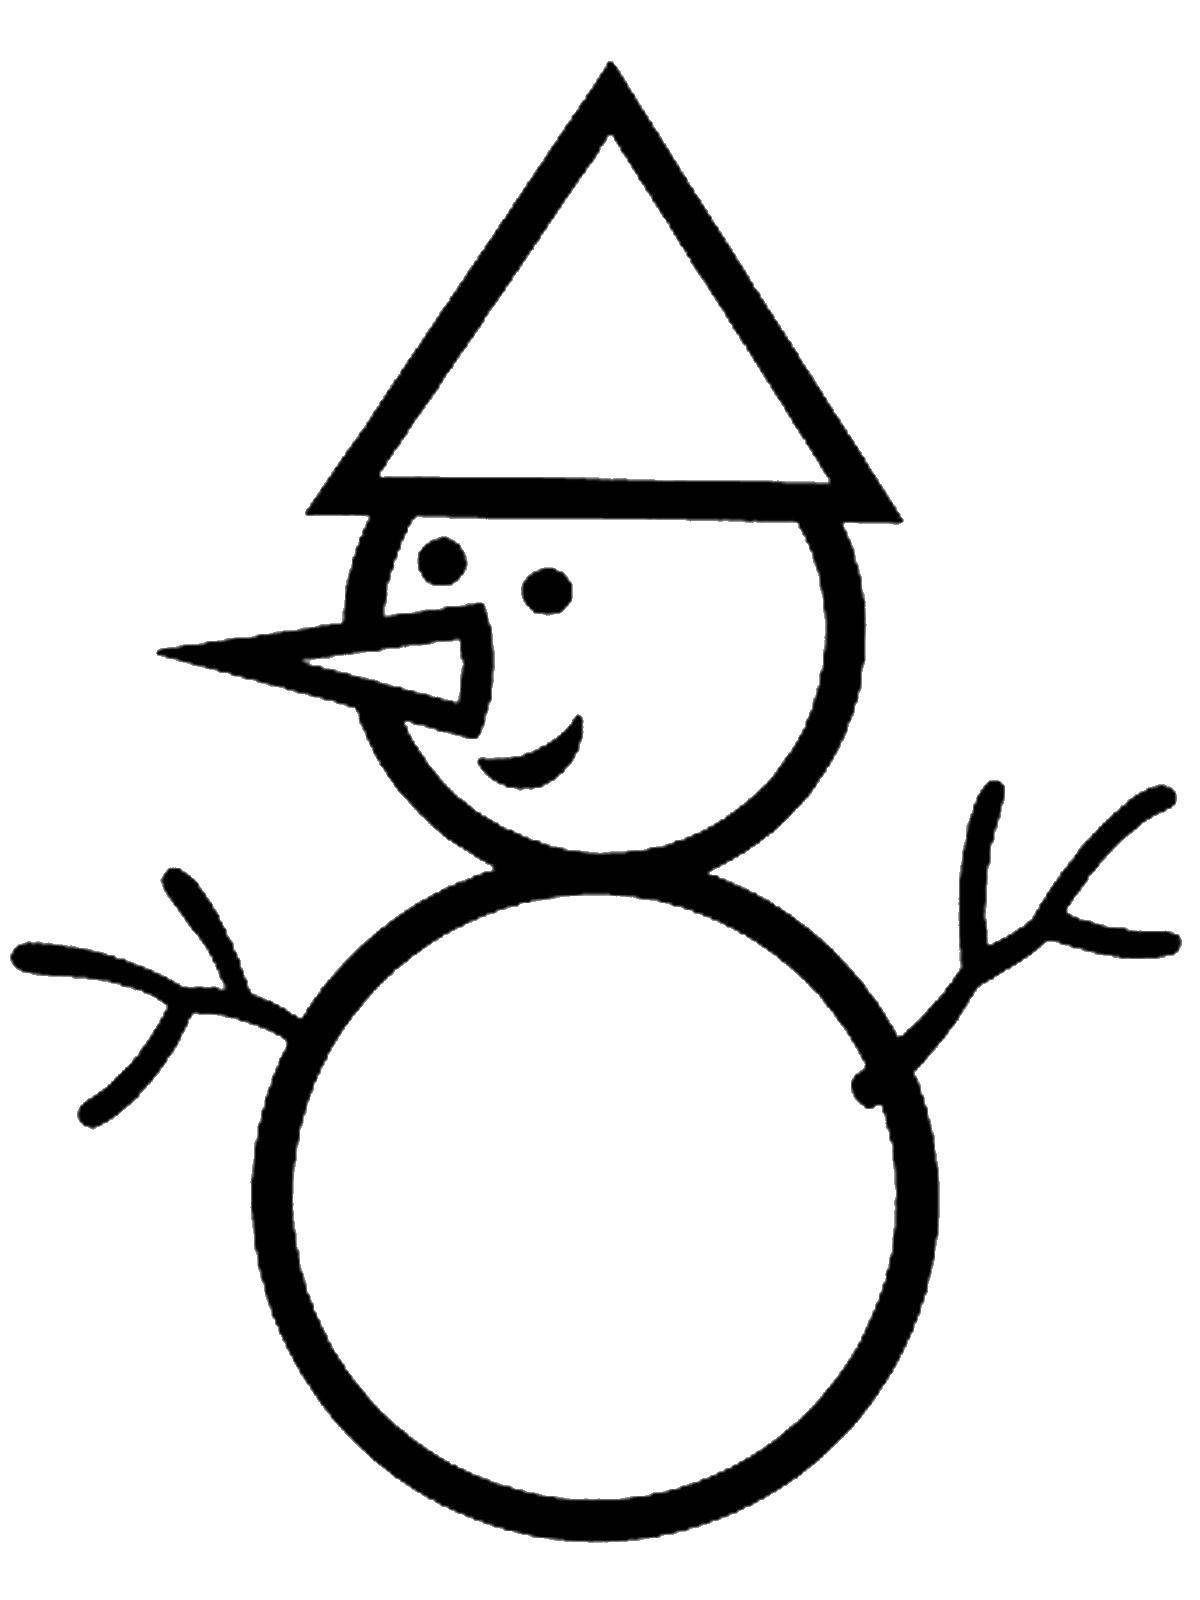 Coloring Snowman. Category little ones. Tags:  snowman.